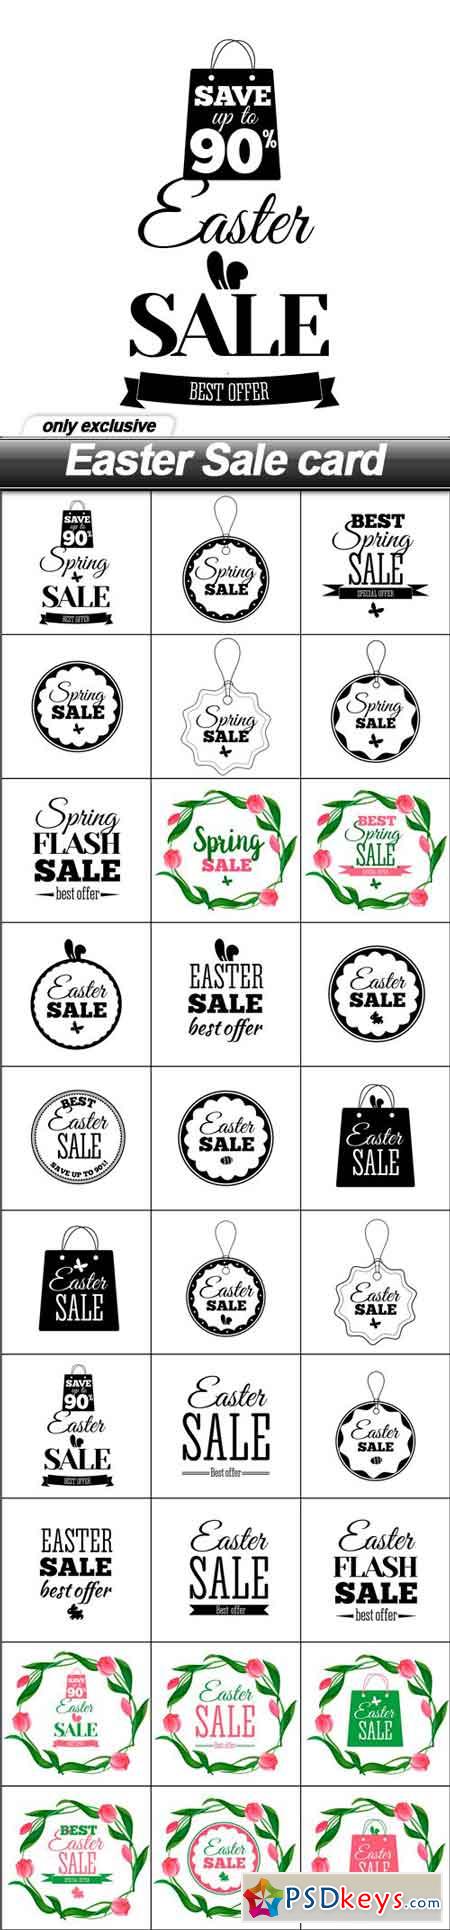 Easter Sale card - 30 EPS